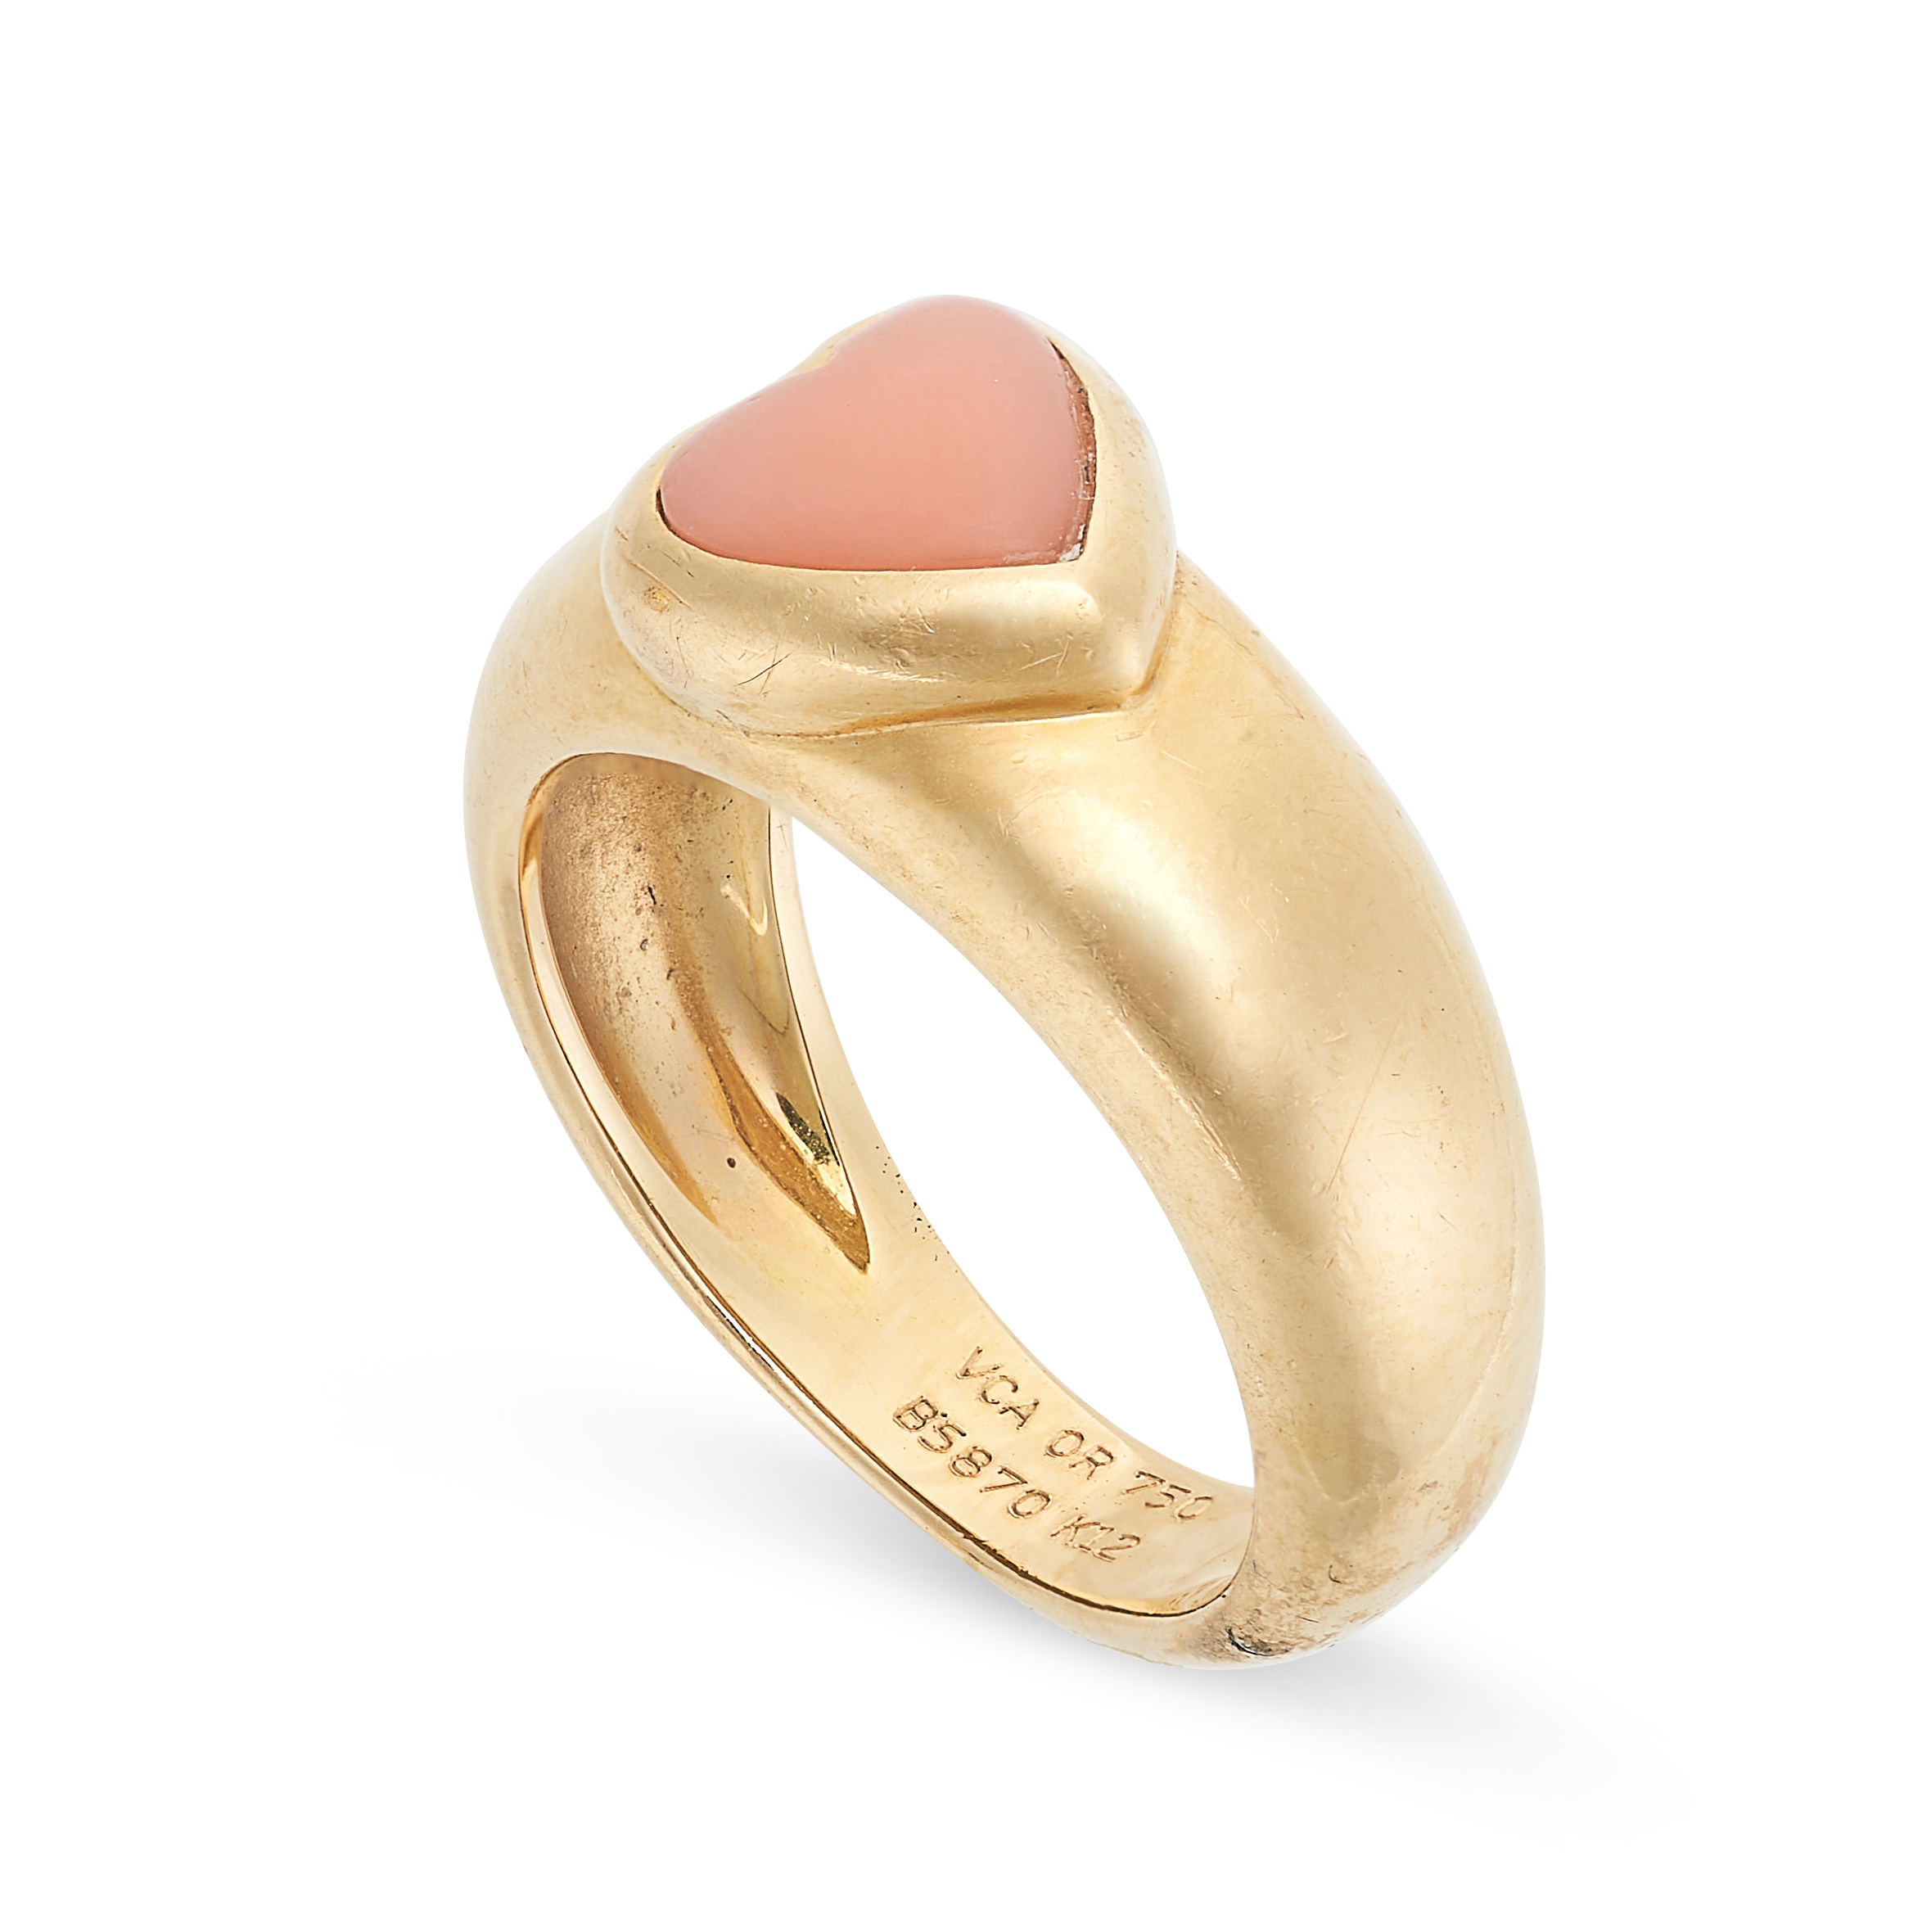 VAN CLEEF & ARPELS, A CORAL HEART RING in 18ct yellow gold, set with a polished heart shaped - Image 2 of 2